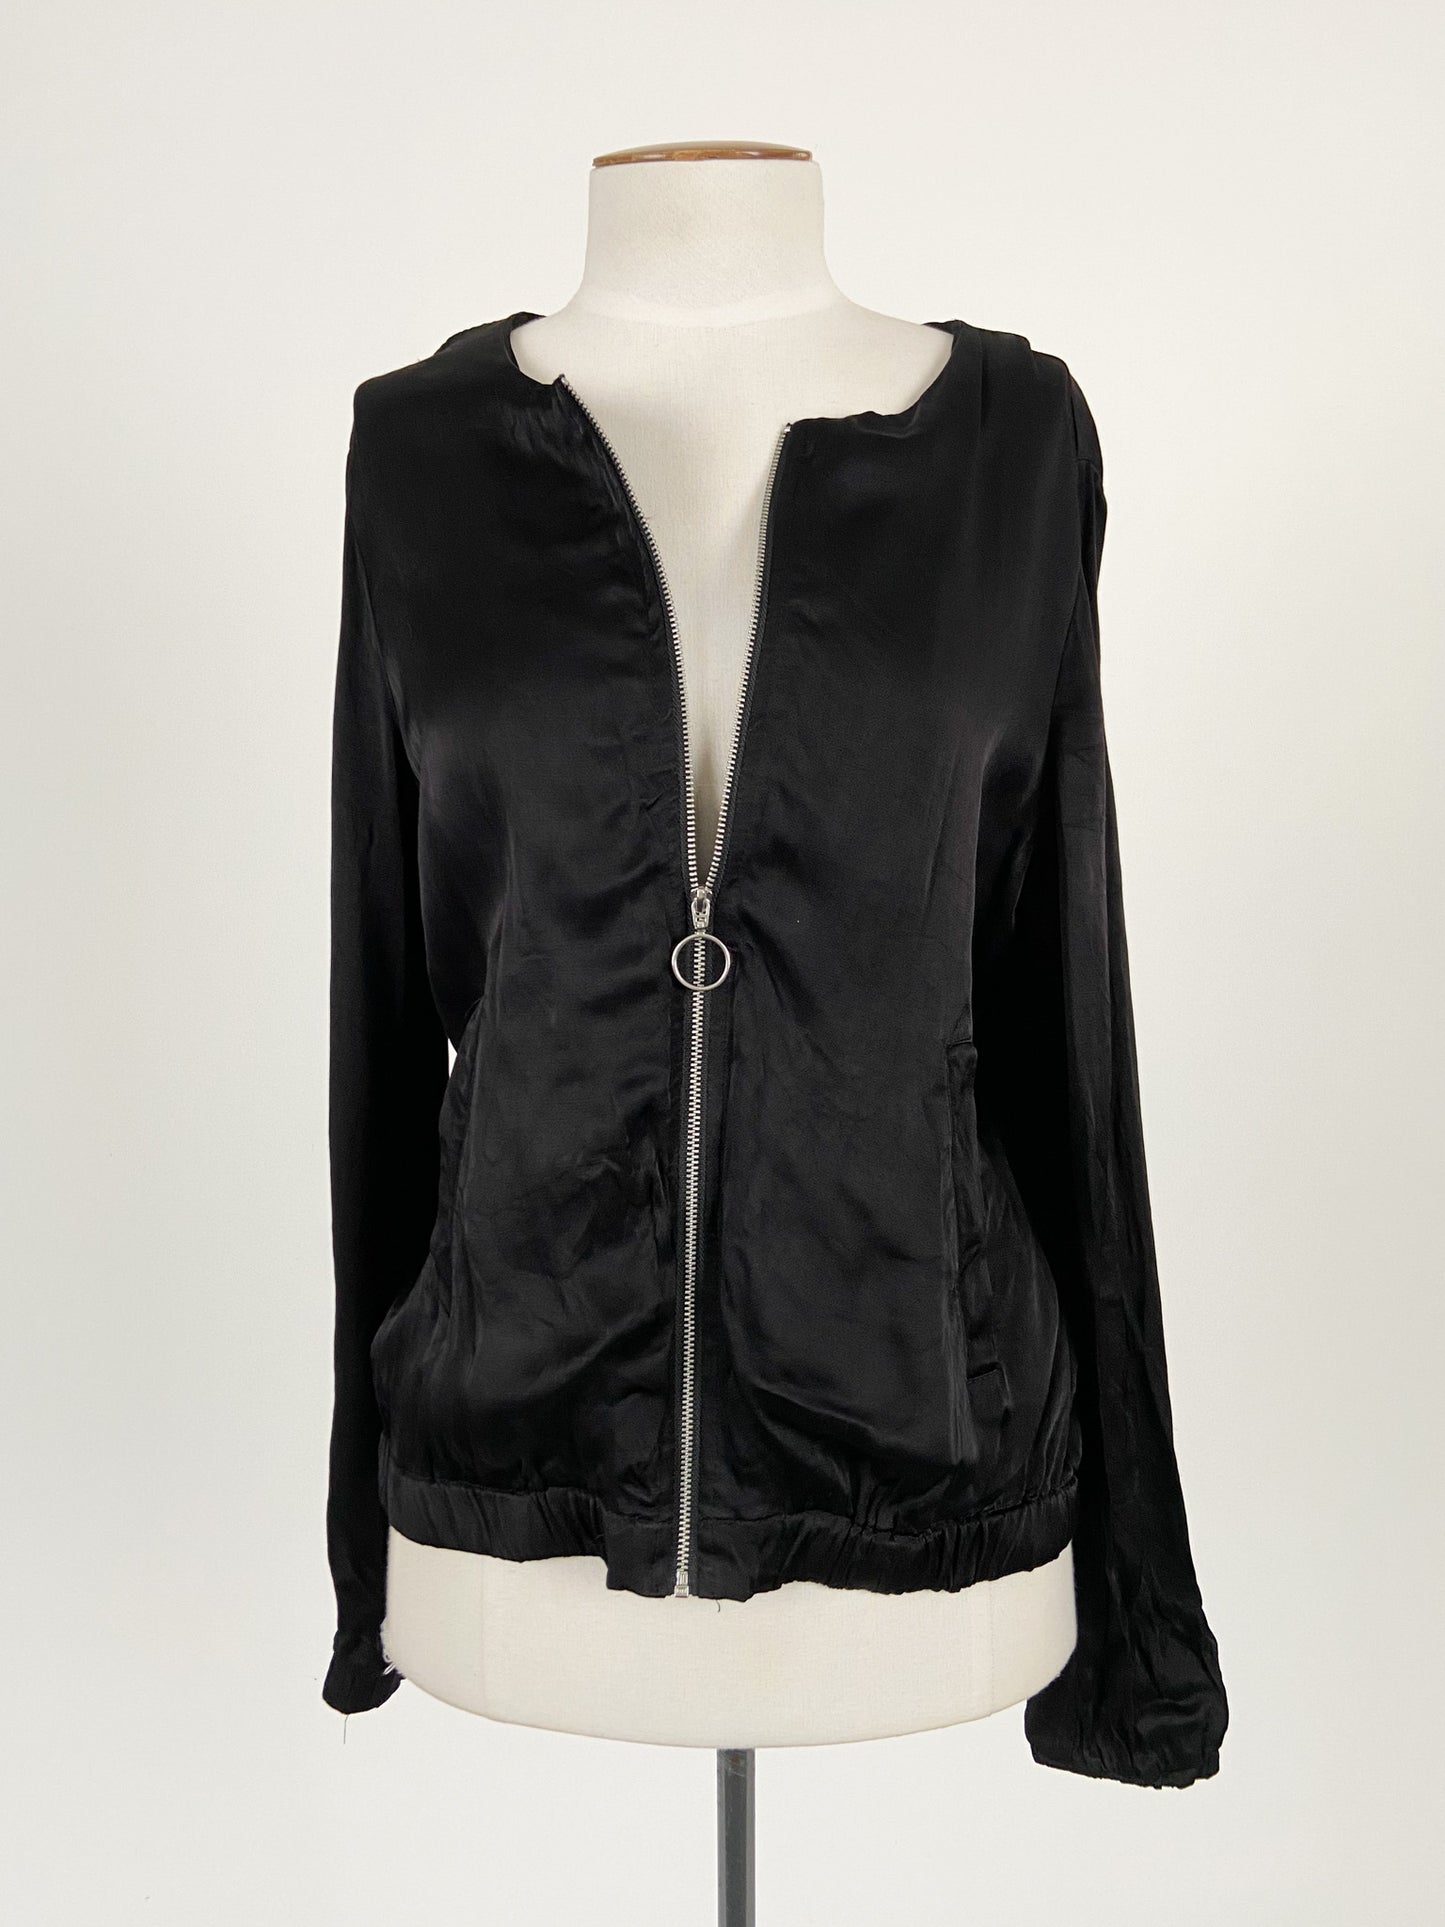 Glassons | Black Casual Jacket | Size 10